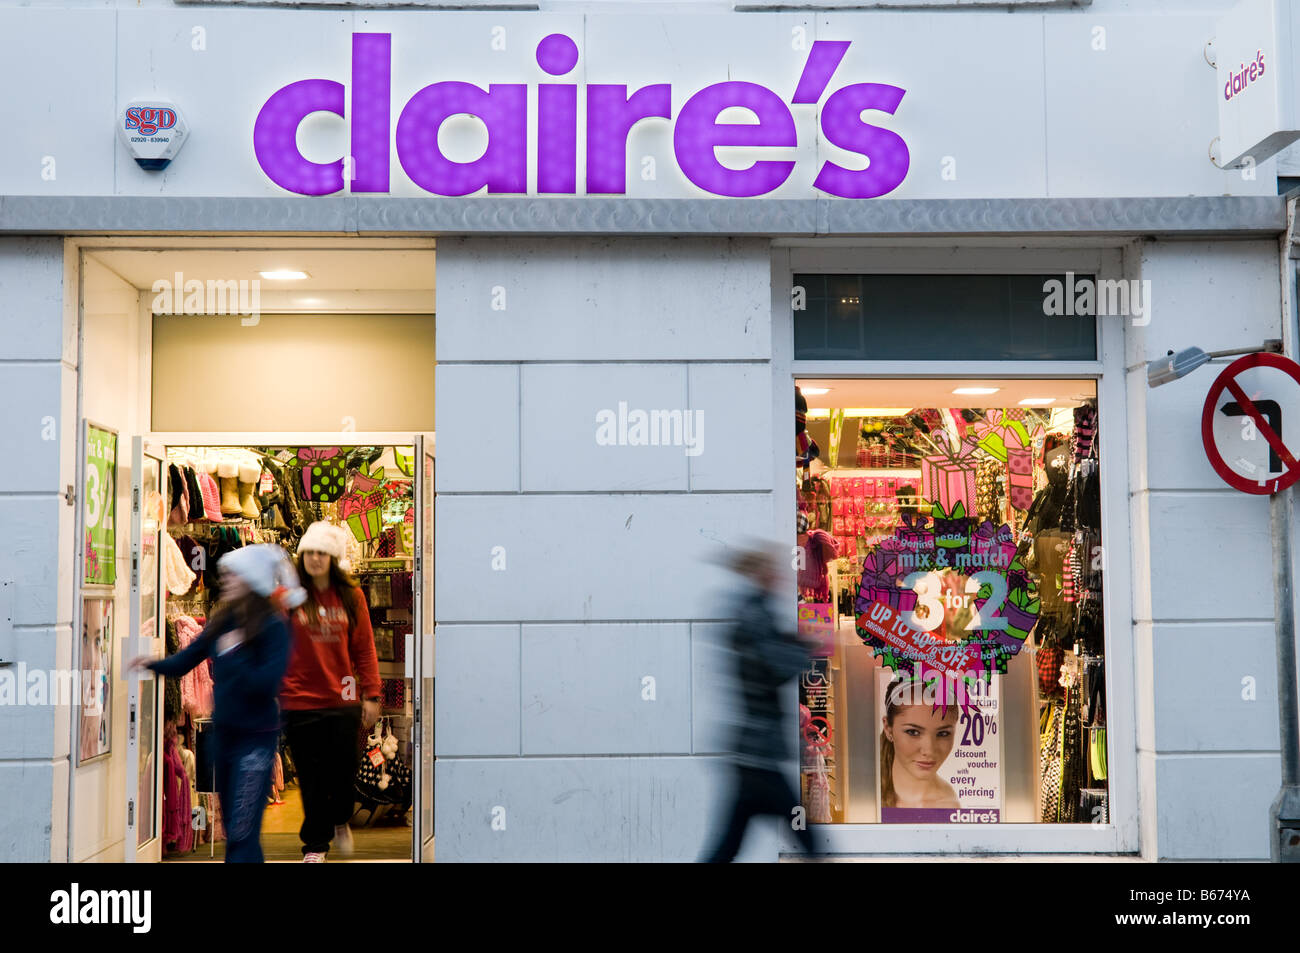 Claire's shop store popular with teenage girls looking for party accessories clothes and cheap hair goods Stock Photo